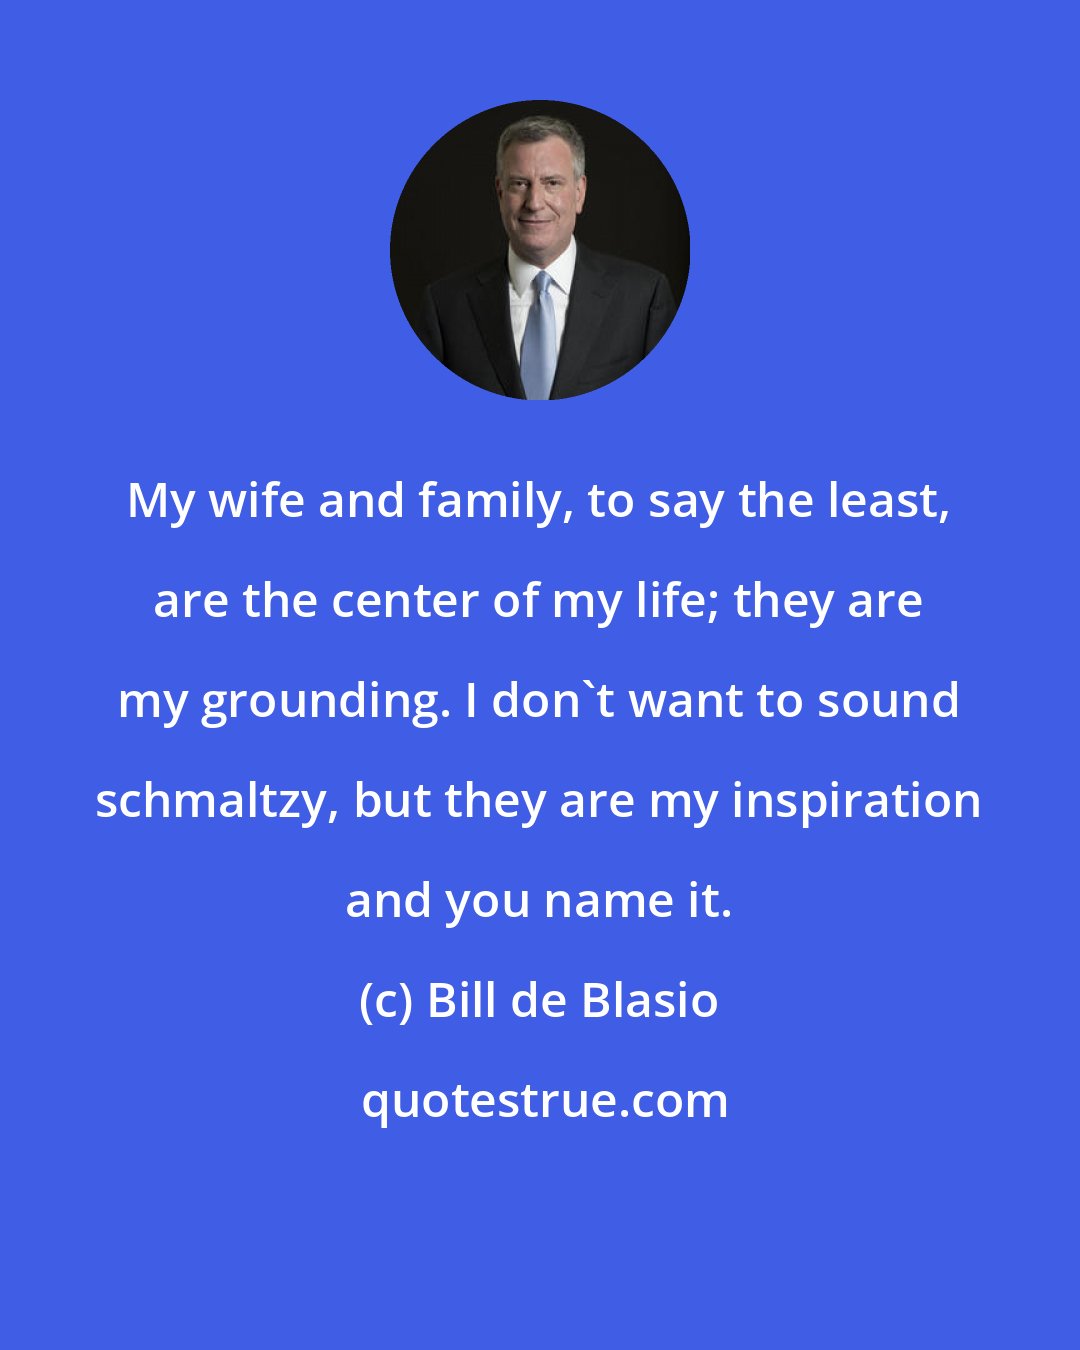 Bill de Blasio: My wife and family, to say the least, are the center of my life; they are my grounding. I don't want to sound schmaltzy, but they are my inspiration and you name it.